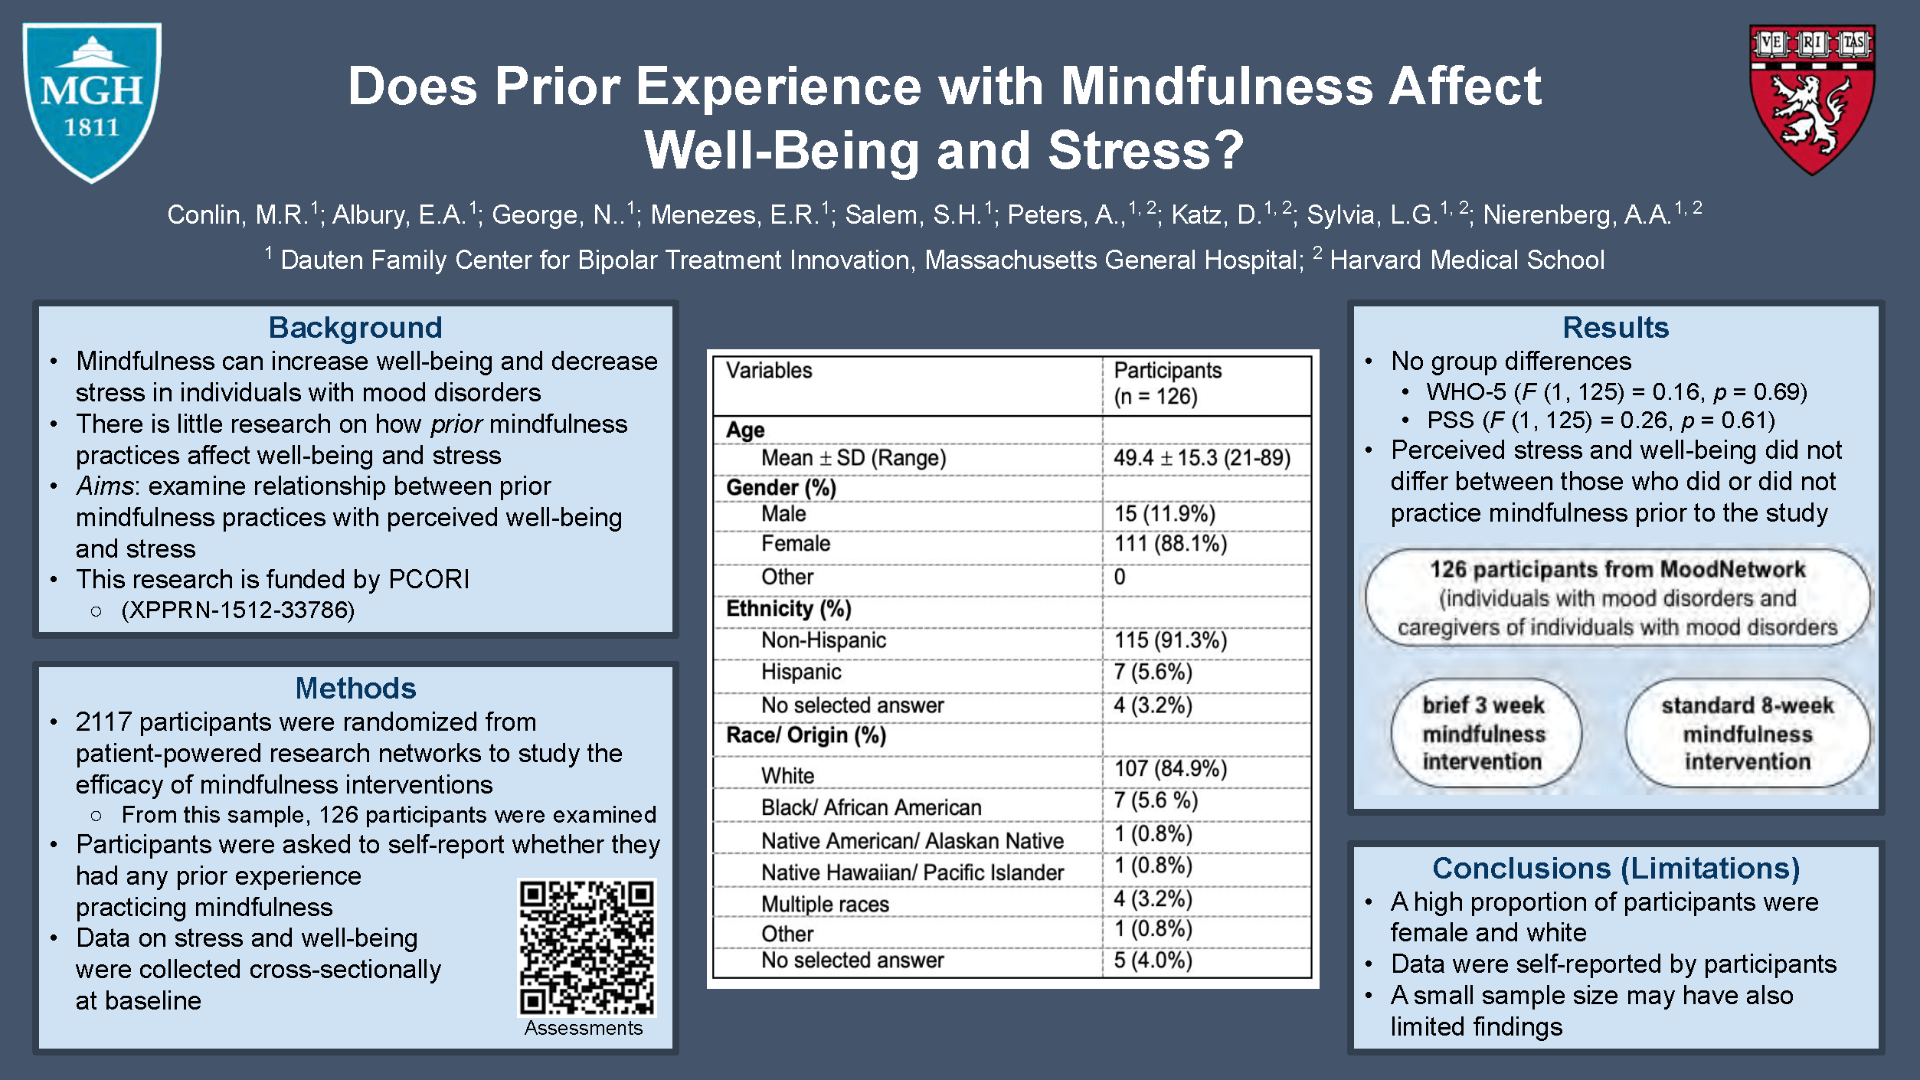 Does Prior Experience with Mindfulness Affect Well-Being and Stress?